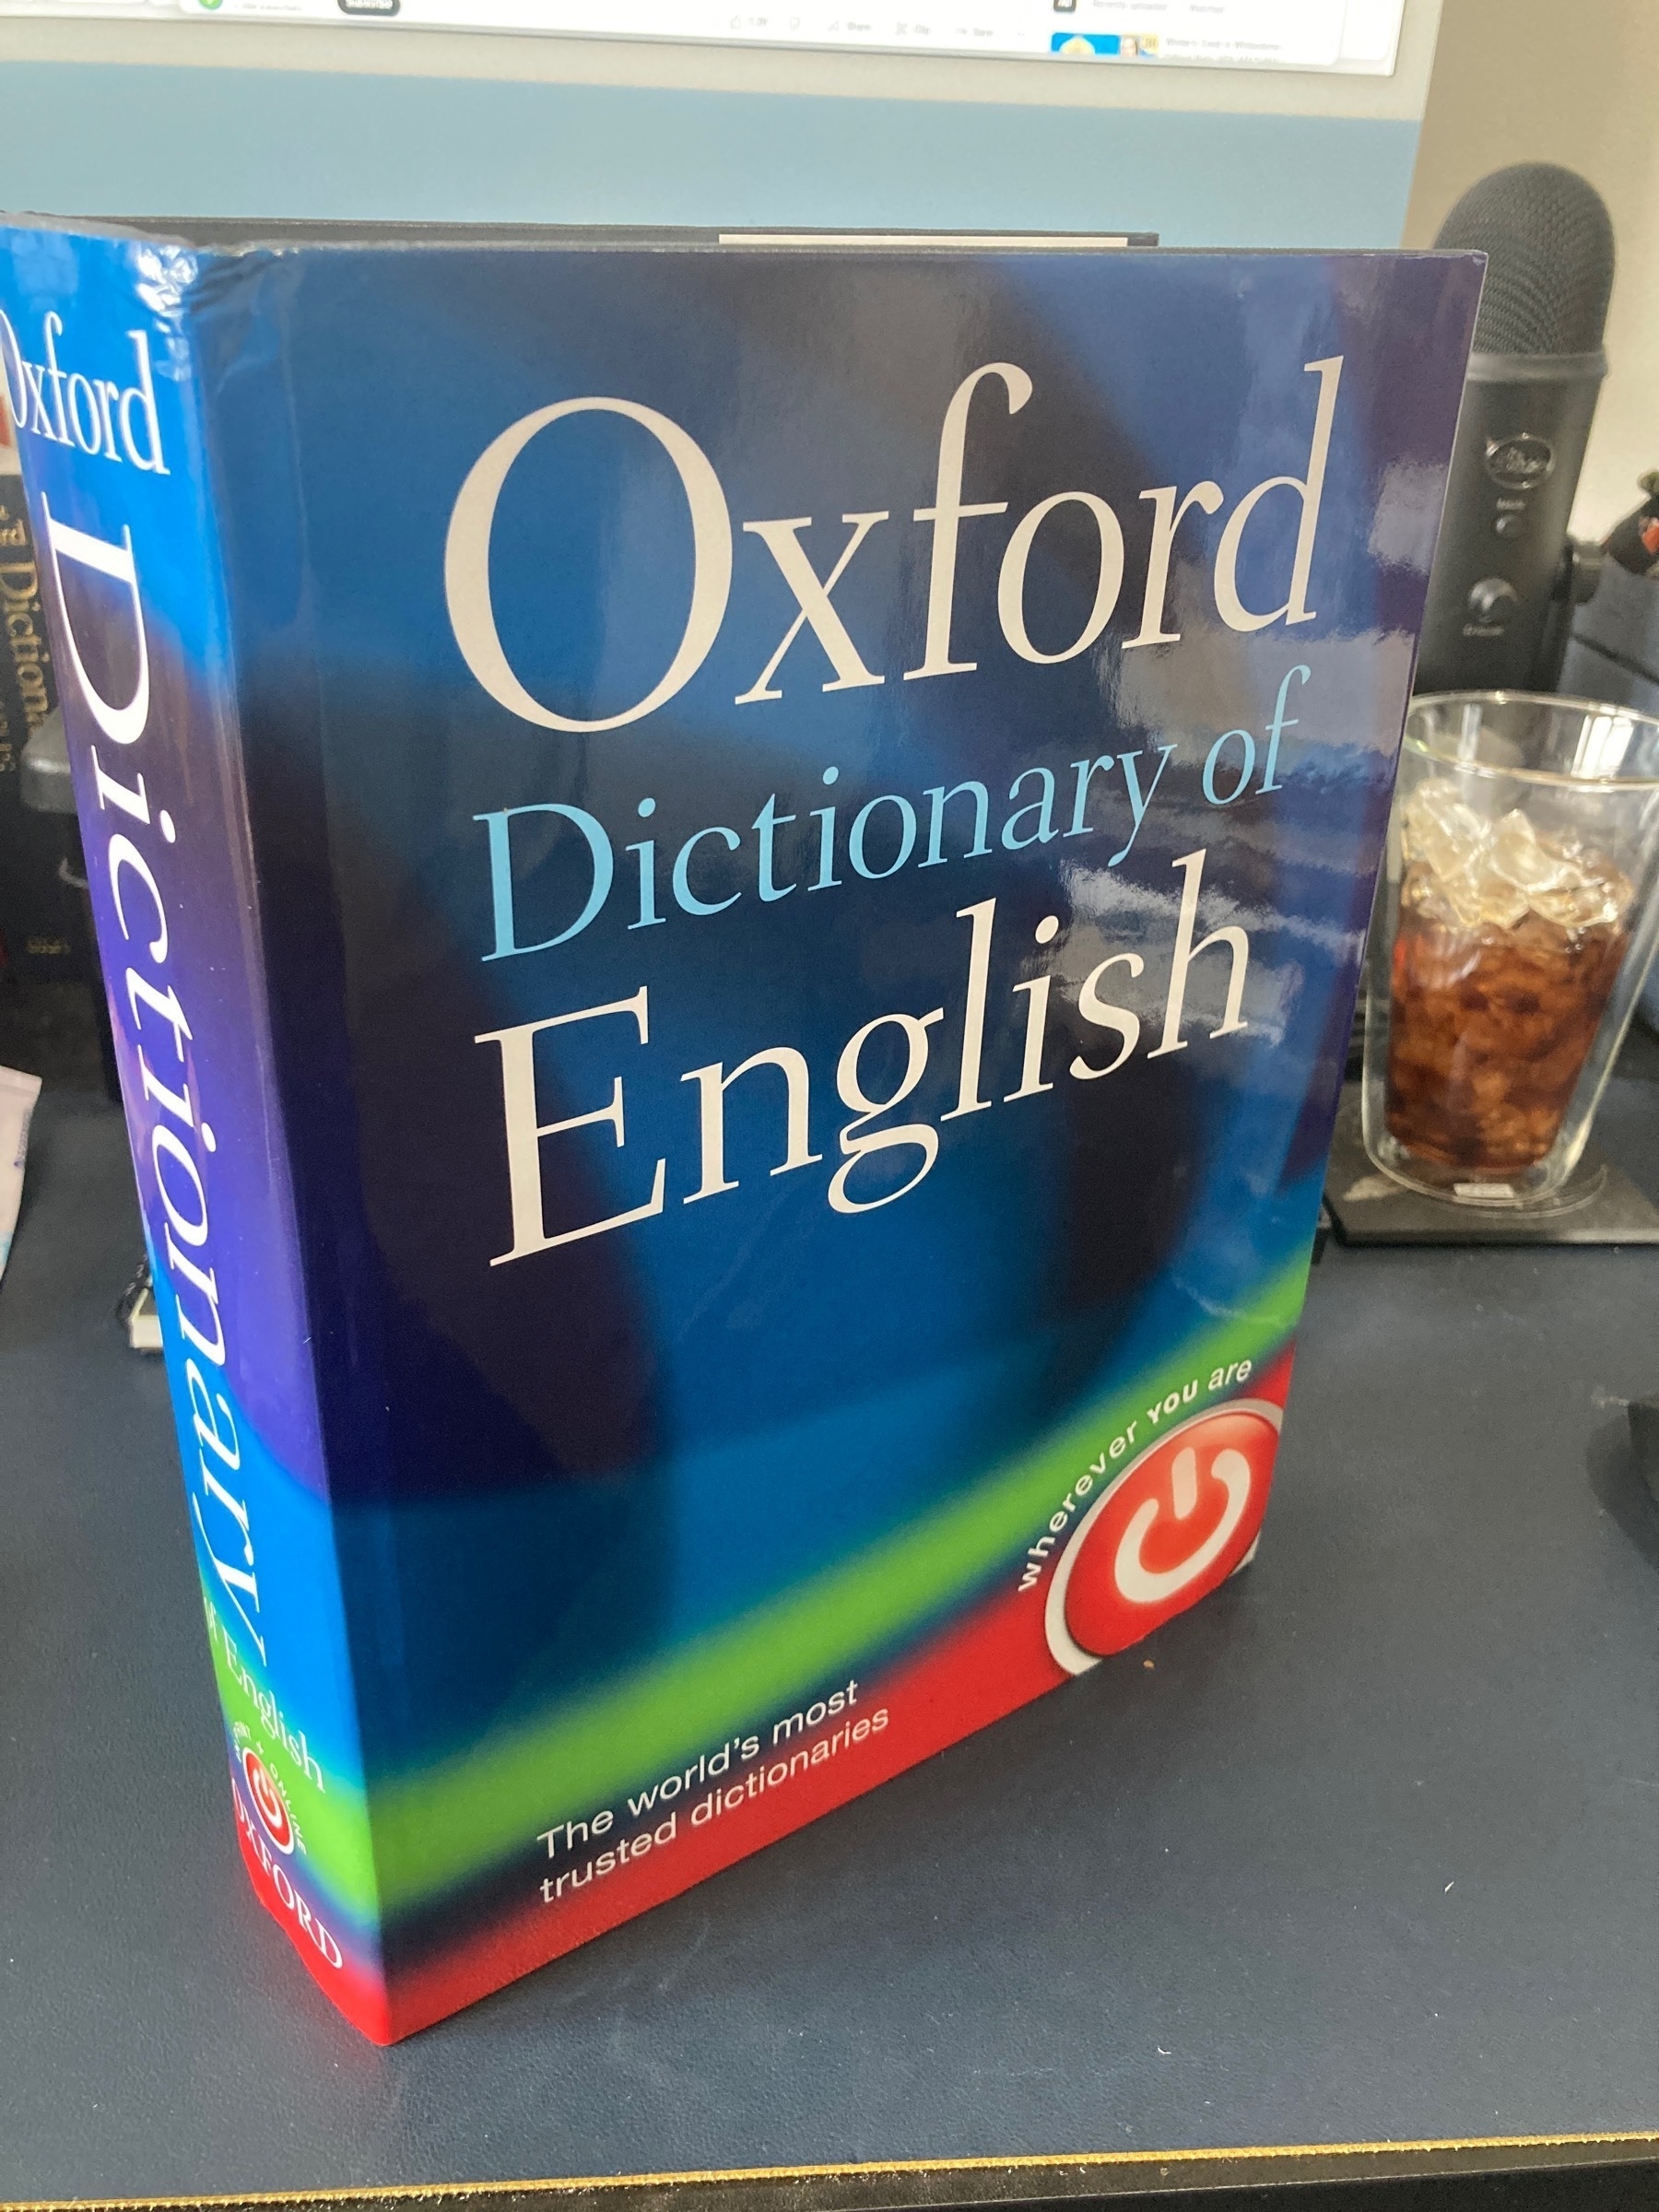 A large physical copy of the Oxford English Dictionary, standing on a desk in front of a keyboard and iMac.